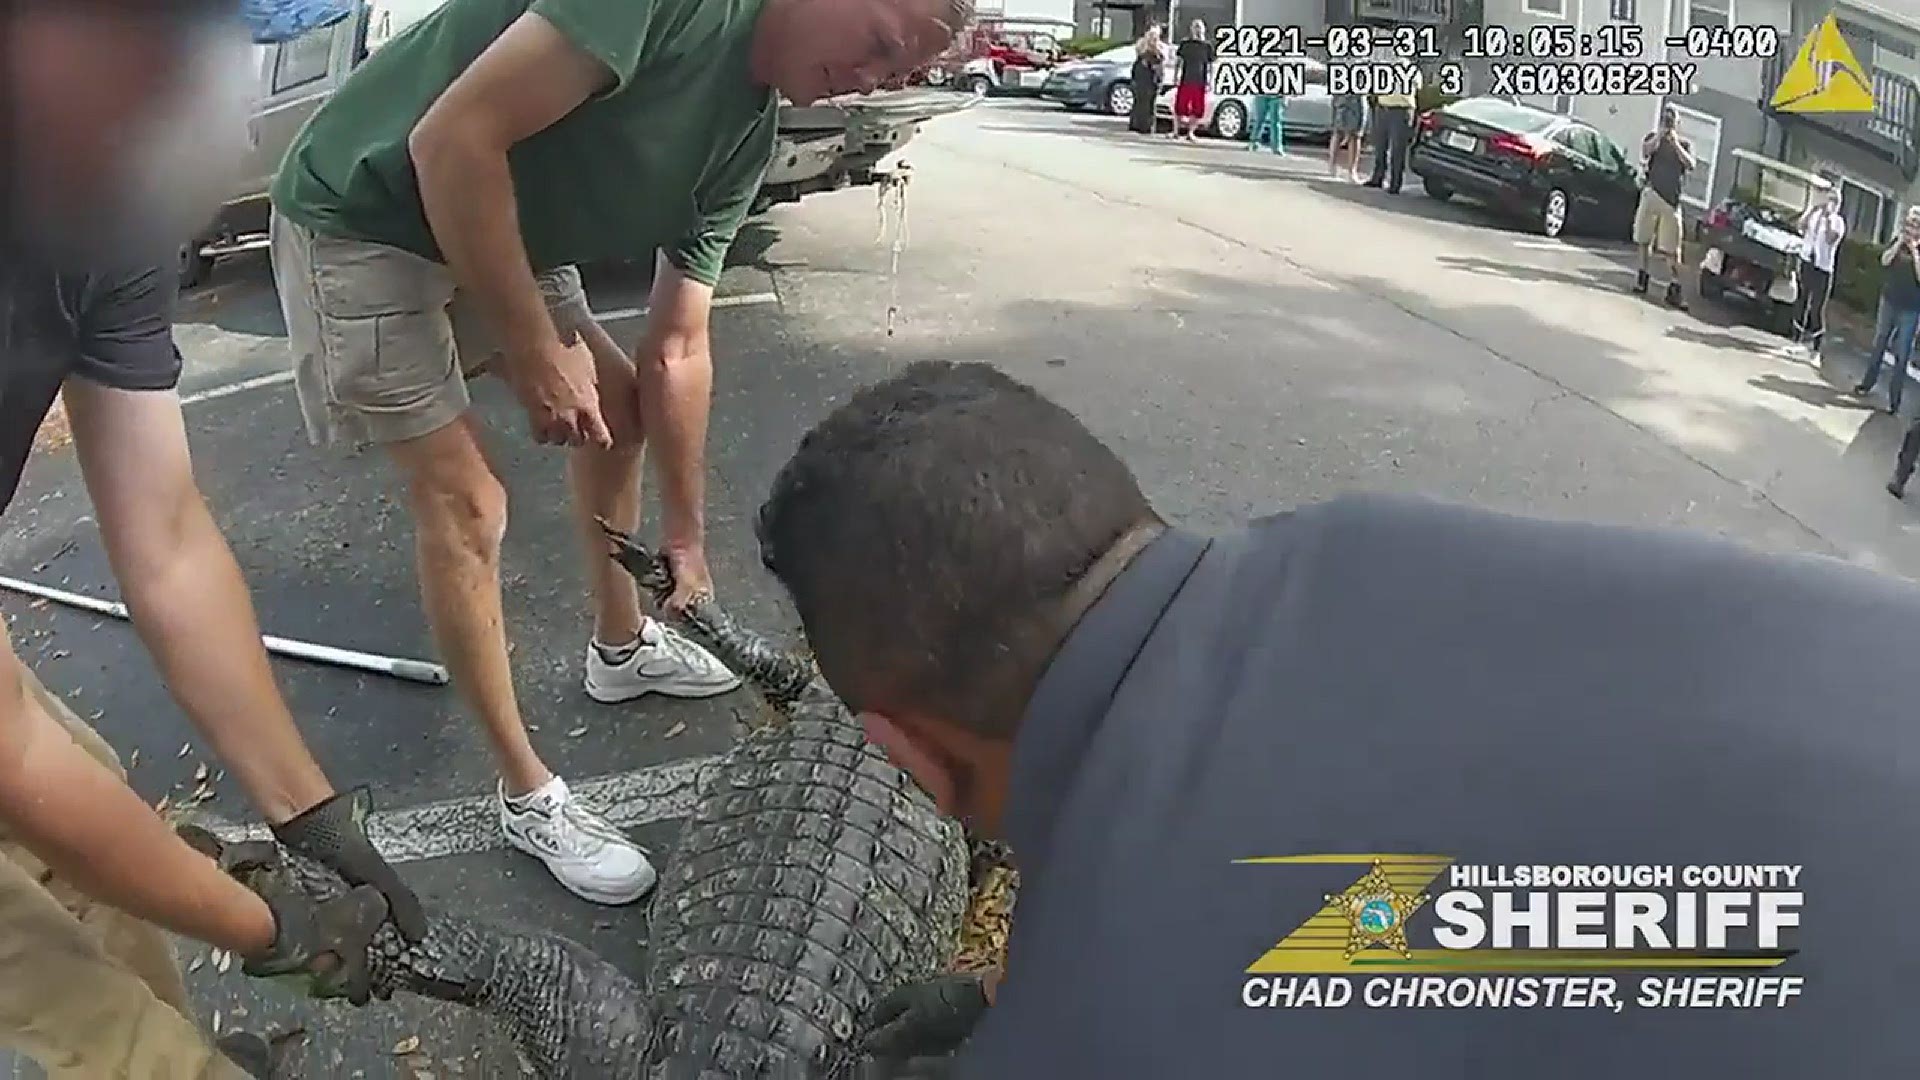 You may have seen this alligator before in a TikTok video. Now, here's an angle of the removal from the Hillsborough County deputy who was there to help.